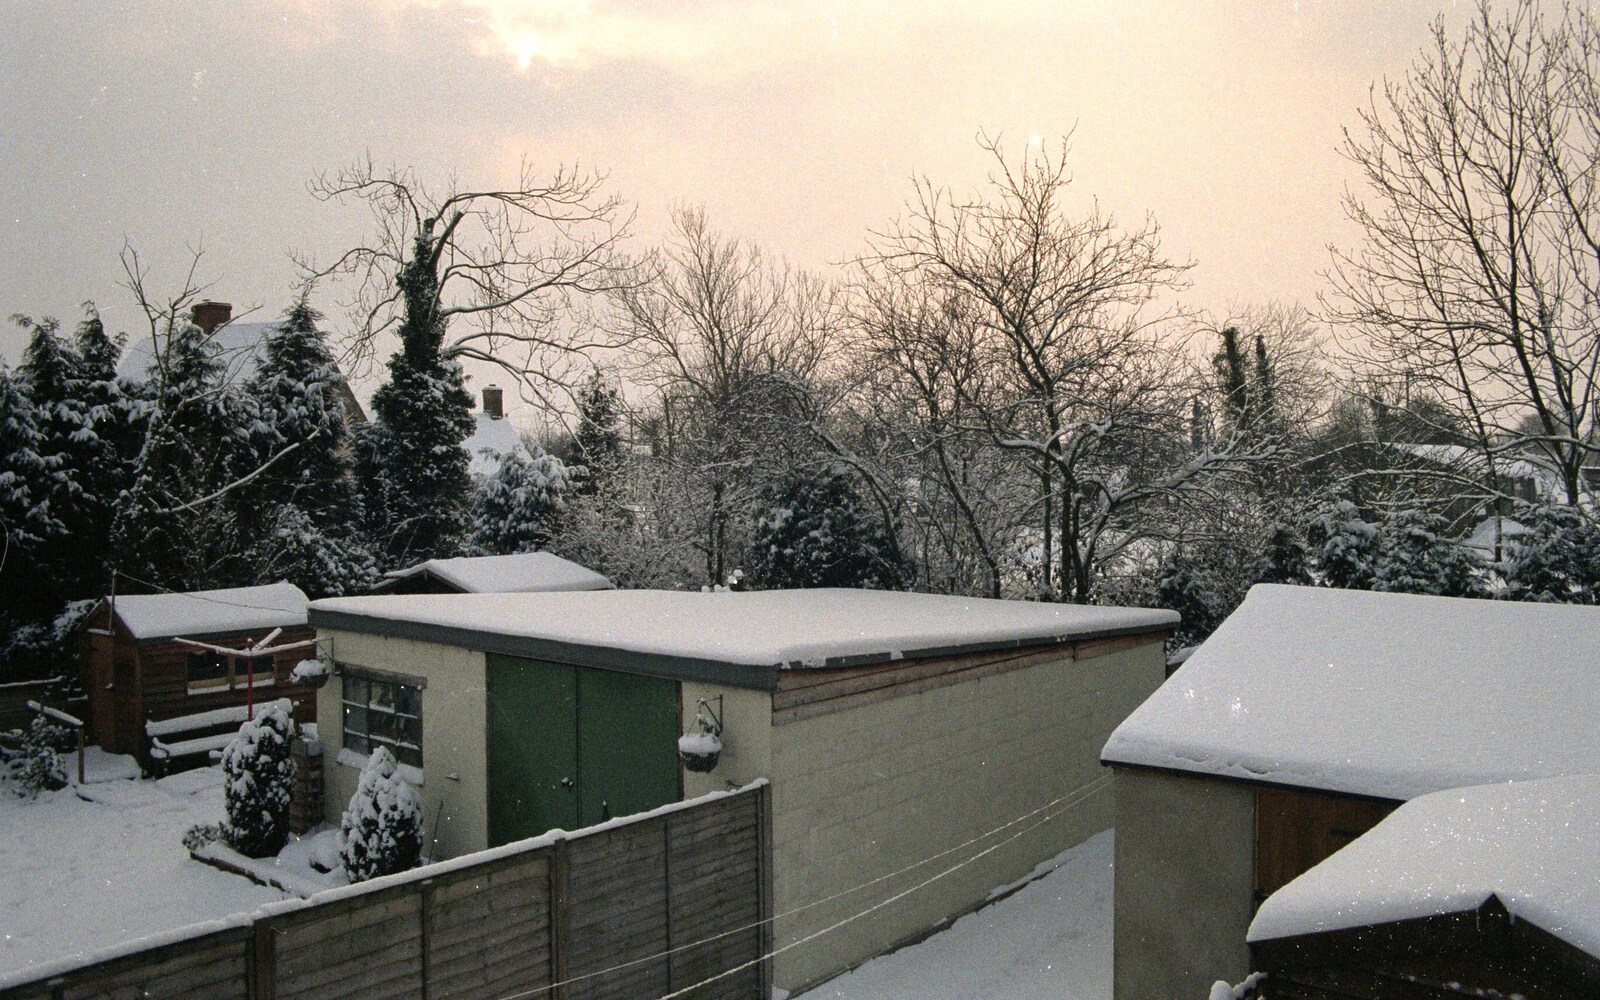 A view out of the bedroom window from Snow Days, Stuston and Norwich, Suffolk and Norfolk - 4th February 1991